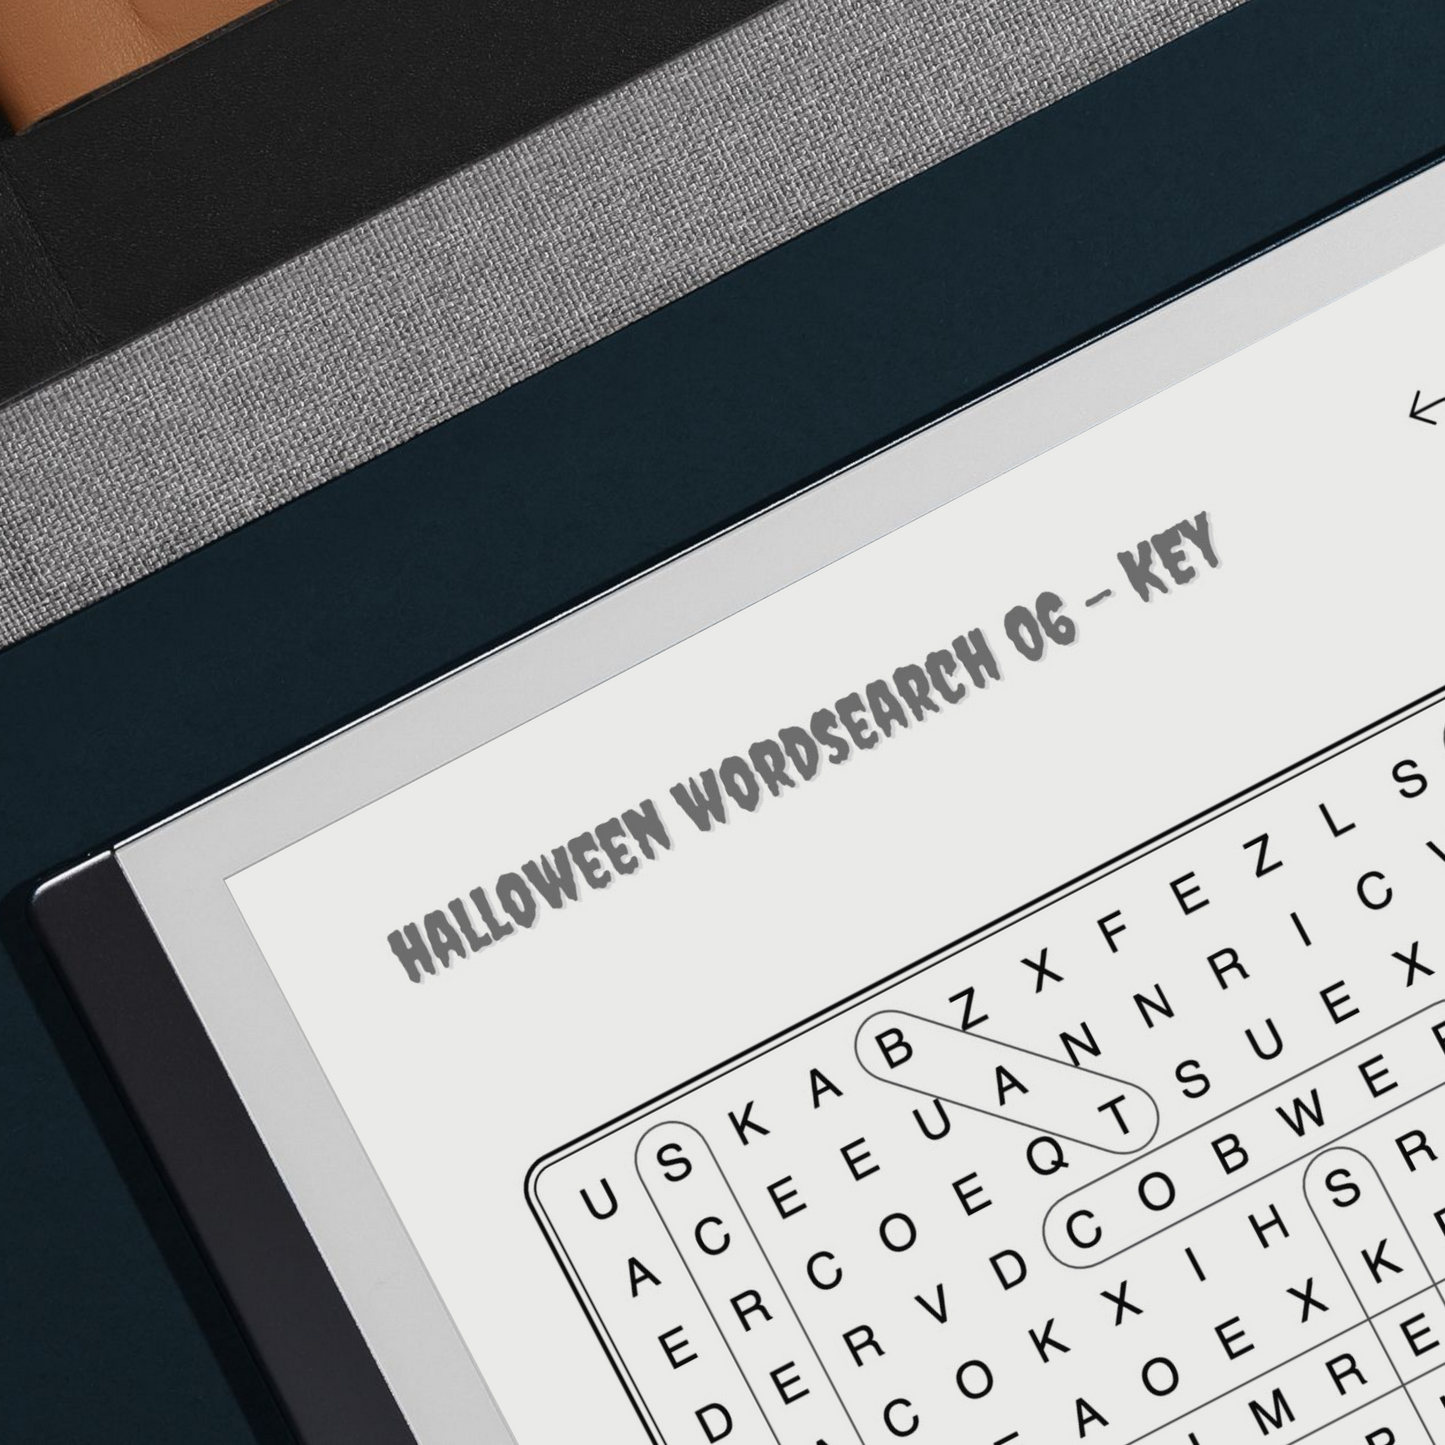 Remarkable 2 Halloween Word Search Puzzles